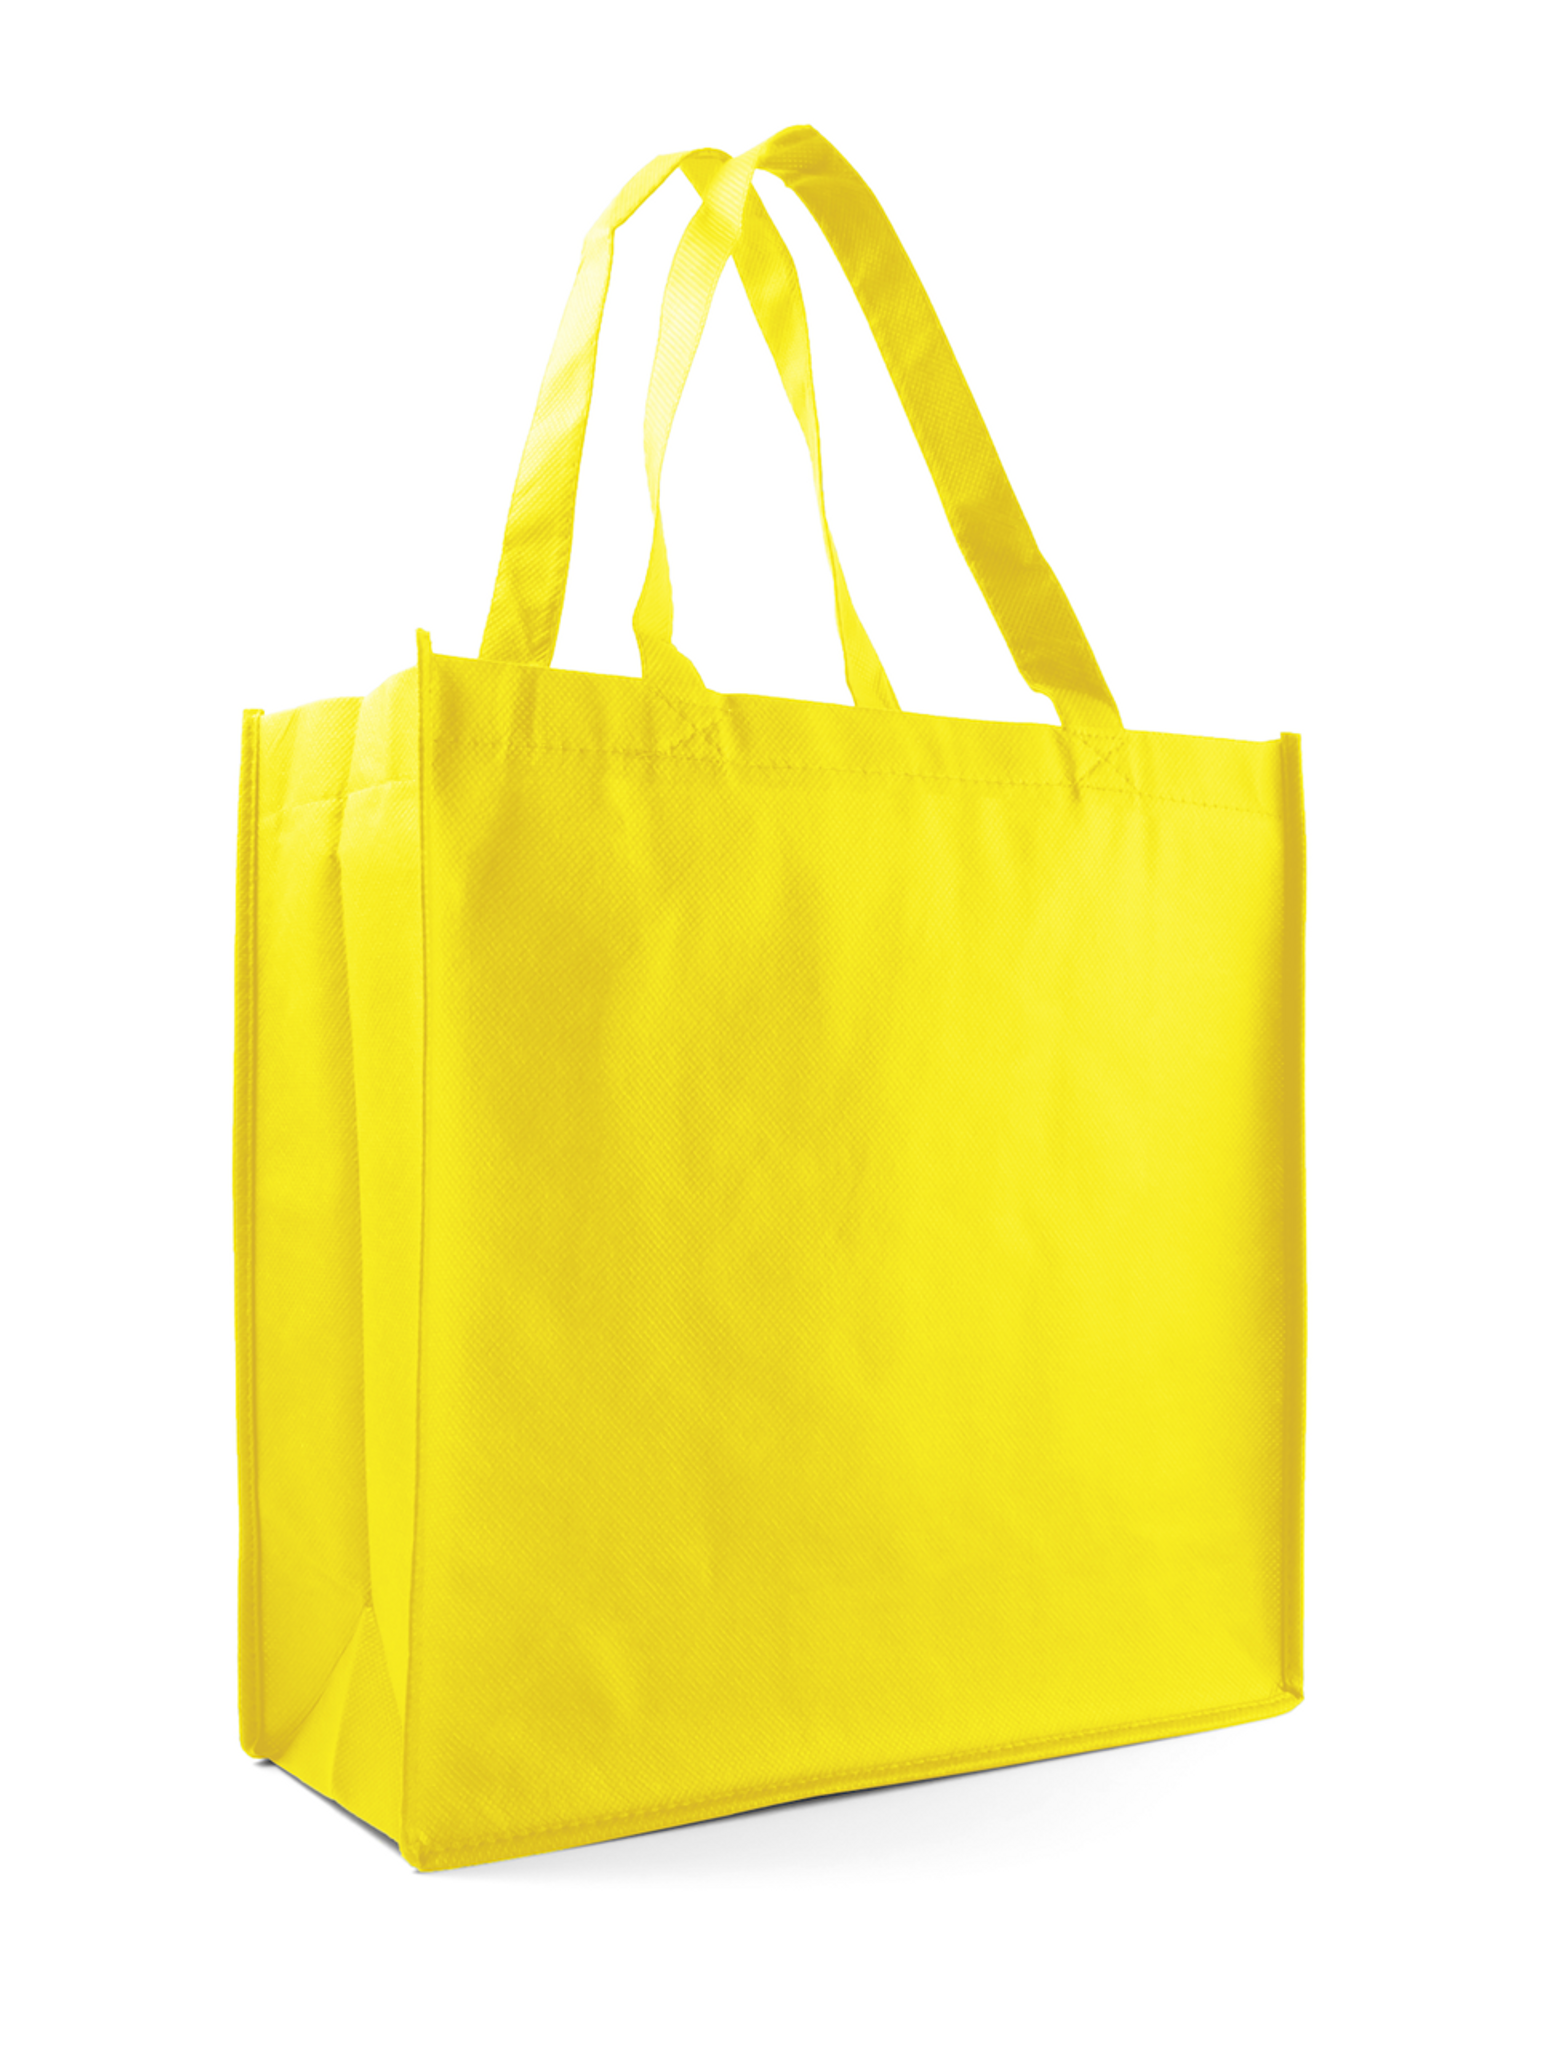 Buy Small Woven Tote Bag - Yellow and White Online